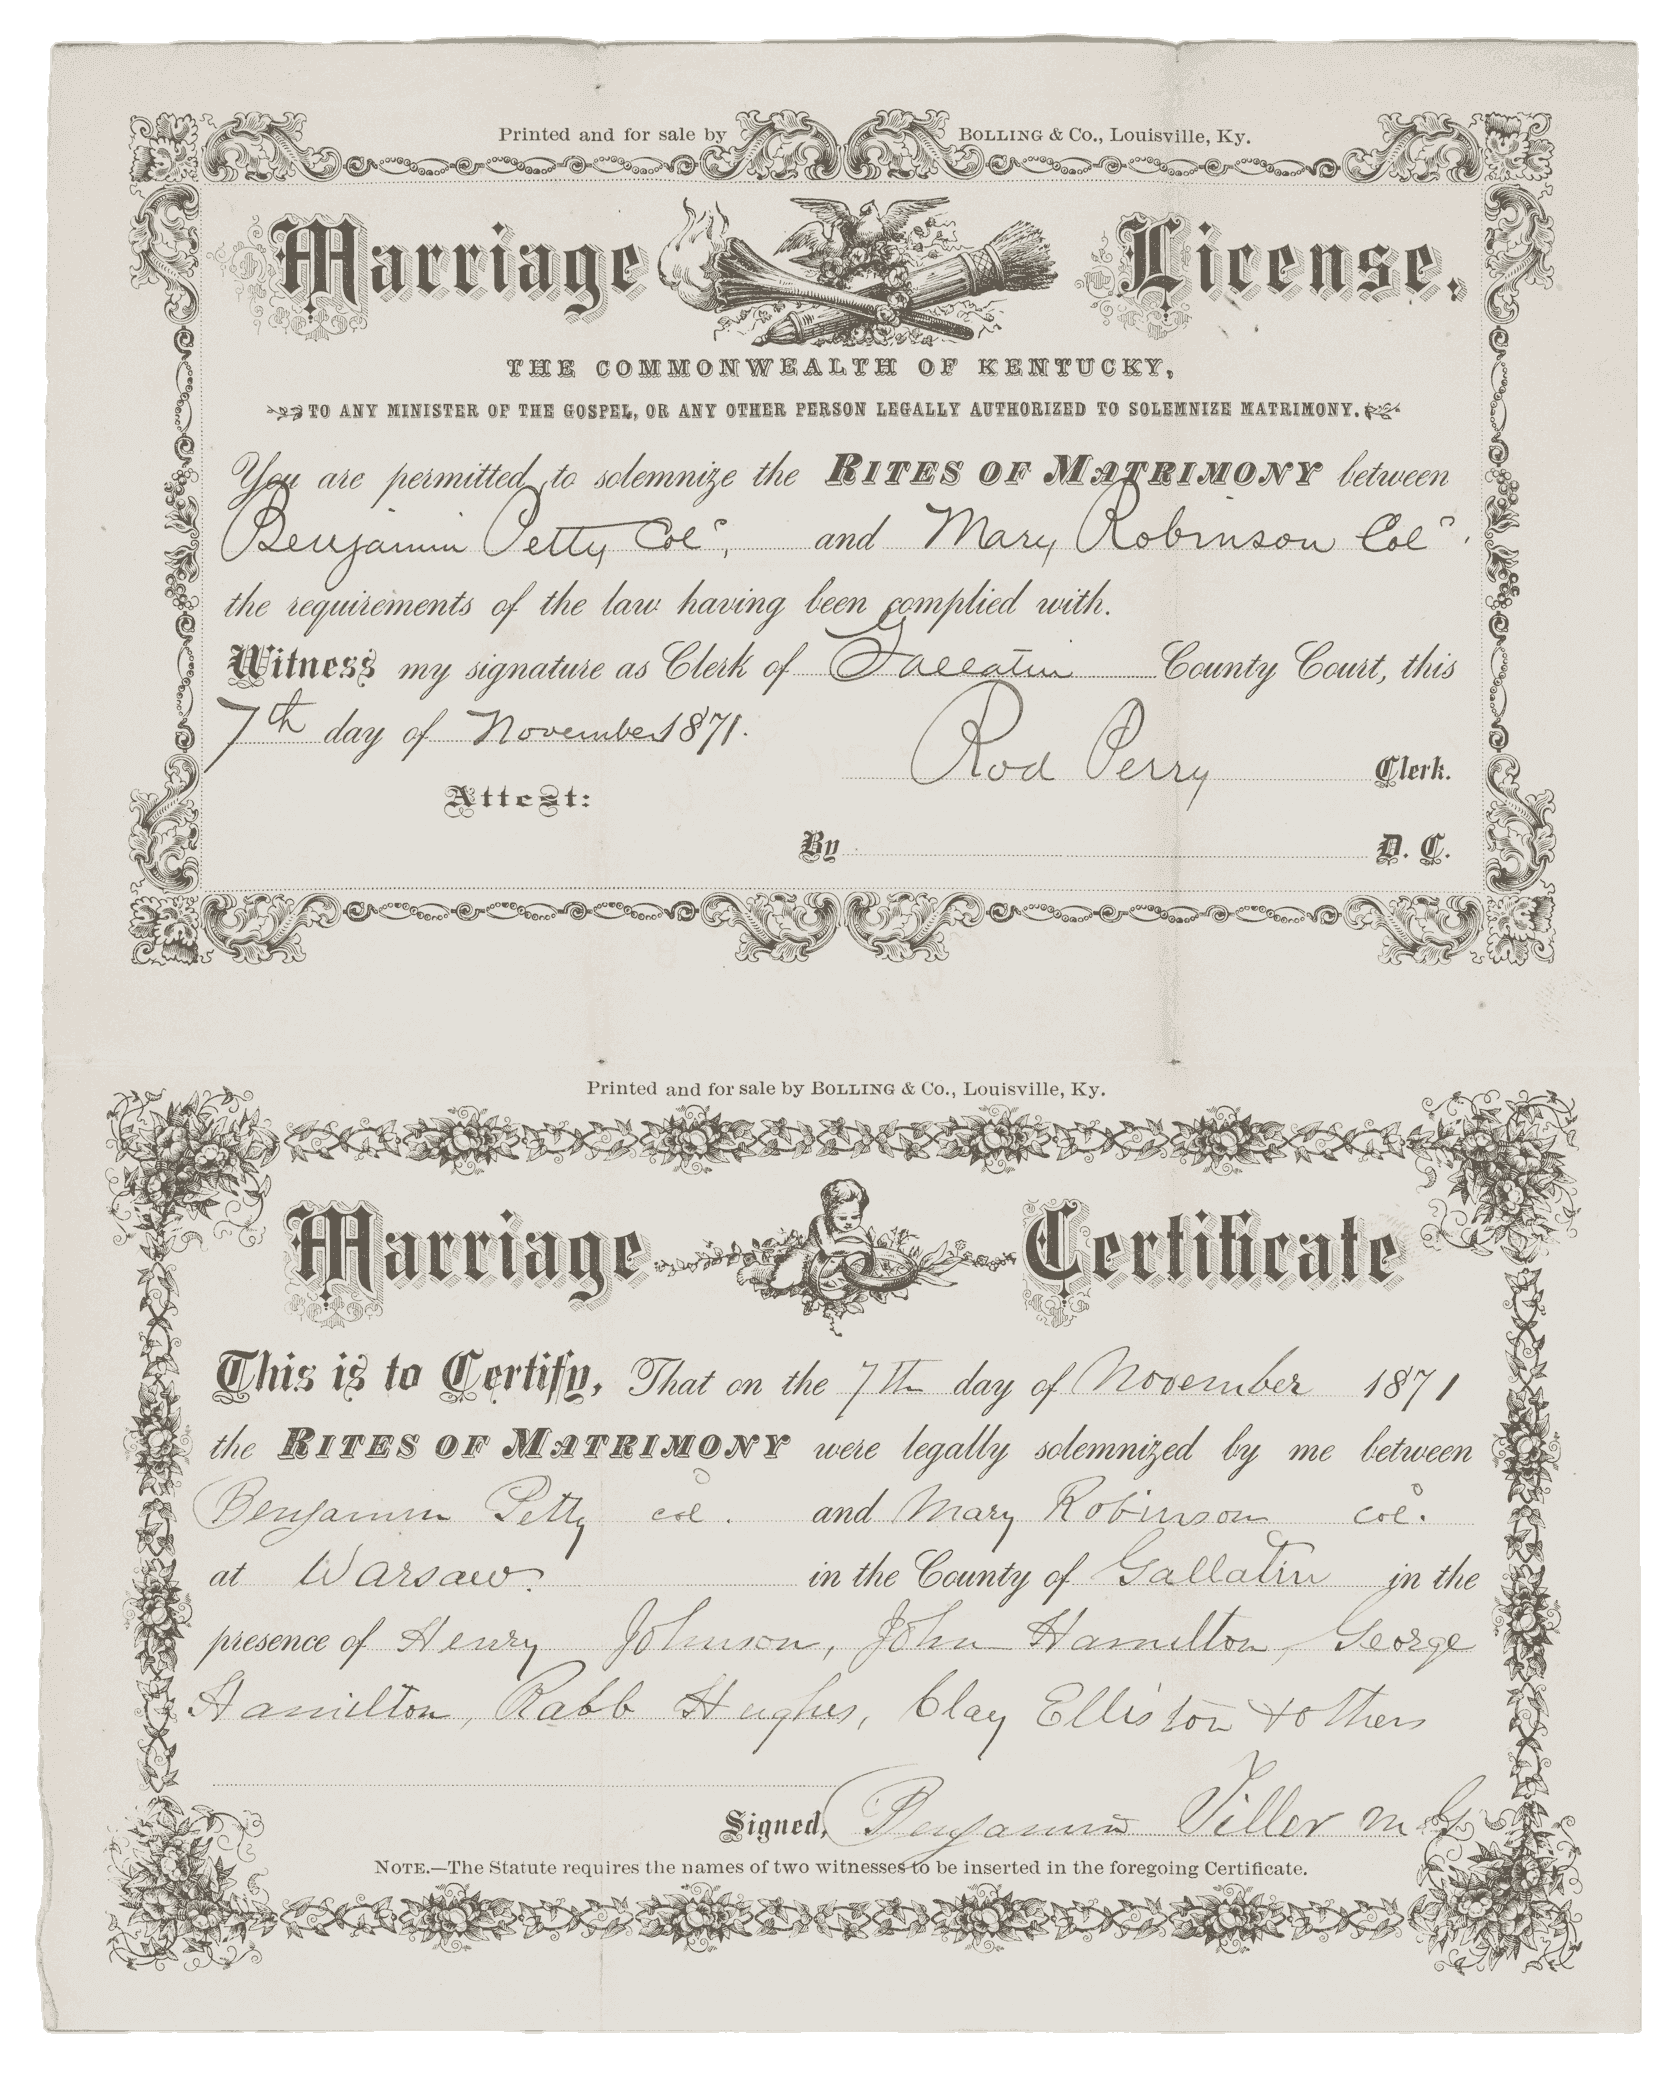 Printed marriage license and certificate for Benjamin Petty and Mary issued on November 7, 1871 in Kentucky.